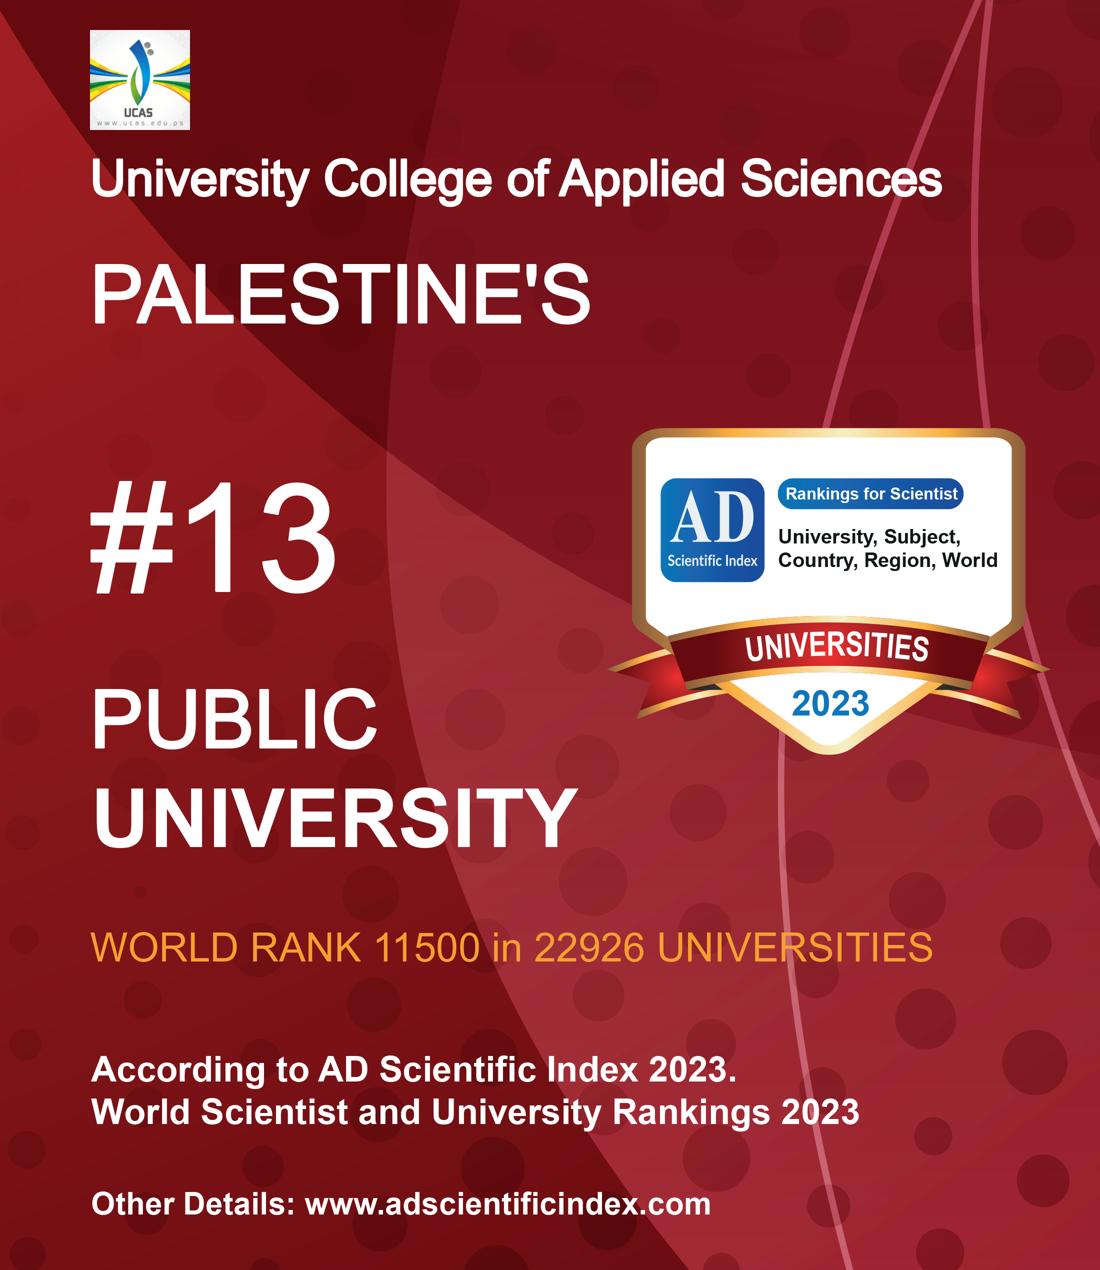 University College of Applied Sciences